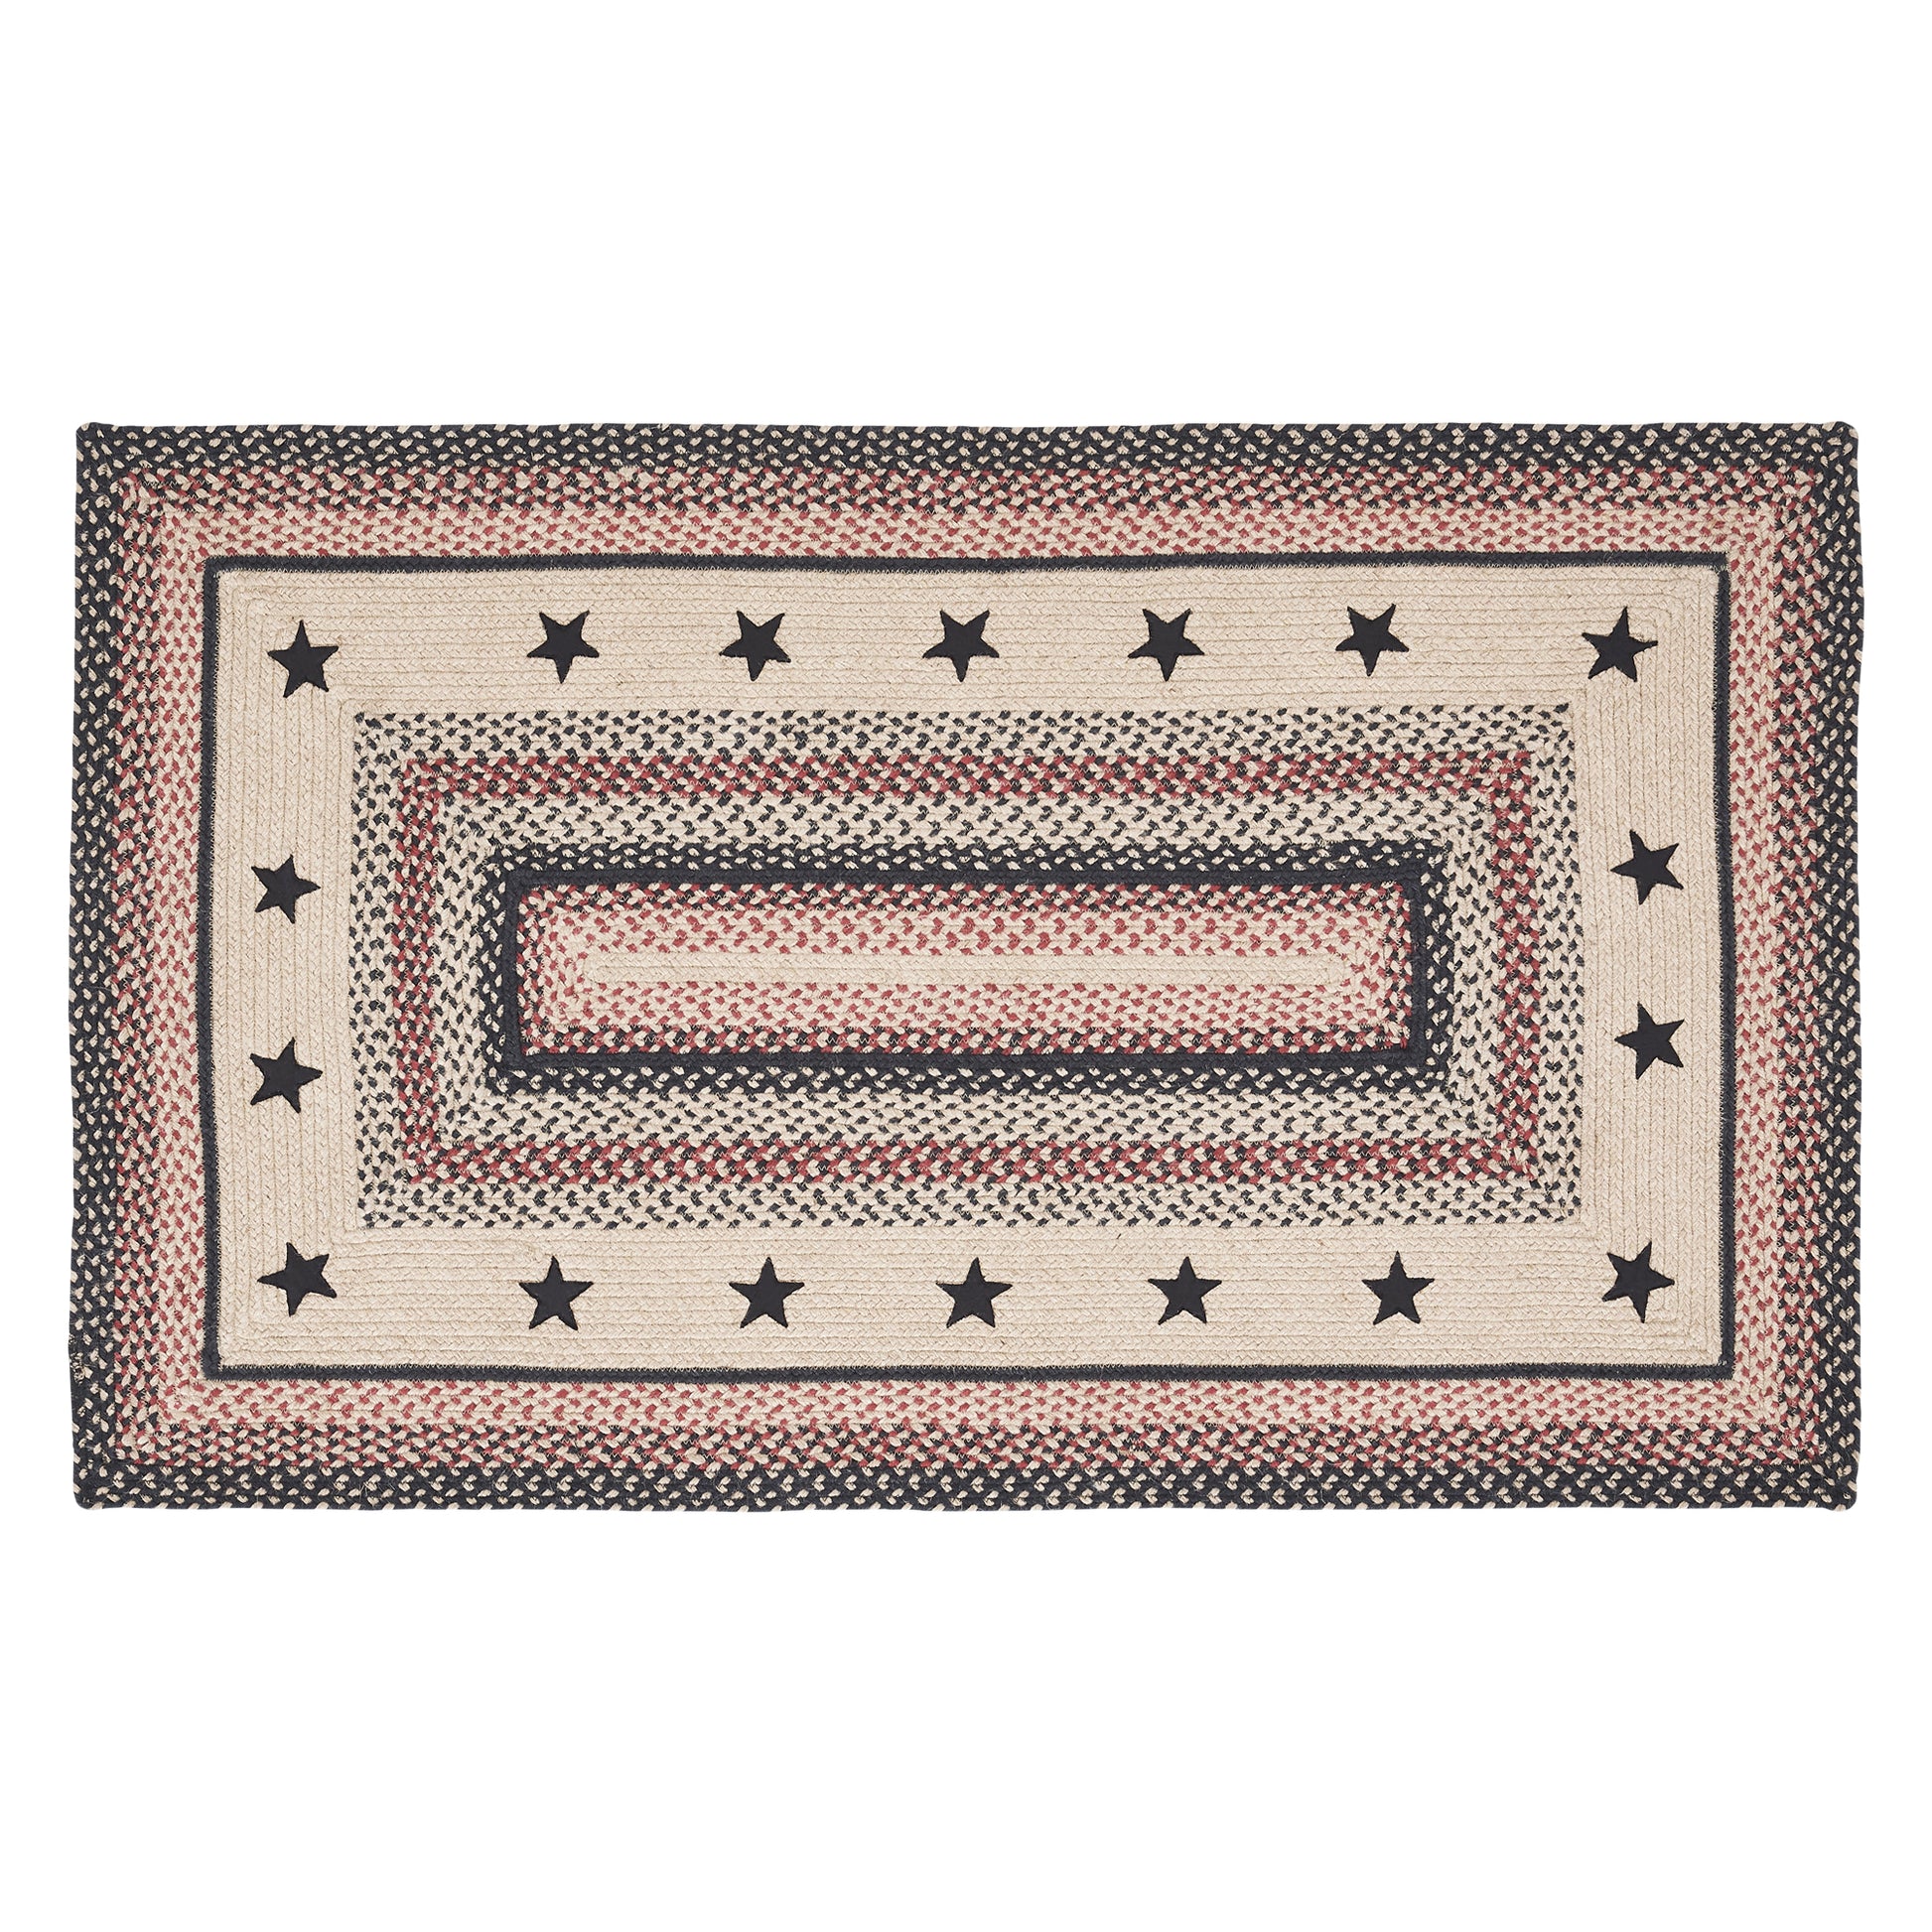 81335-Colonial-Star-Jute-Rug-Rect-w-Pad-36x60-image-6